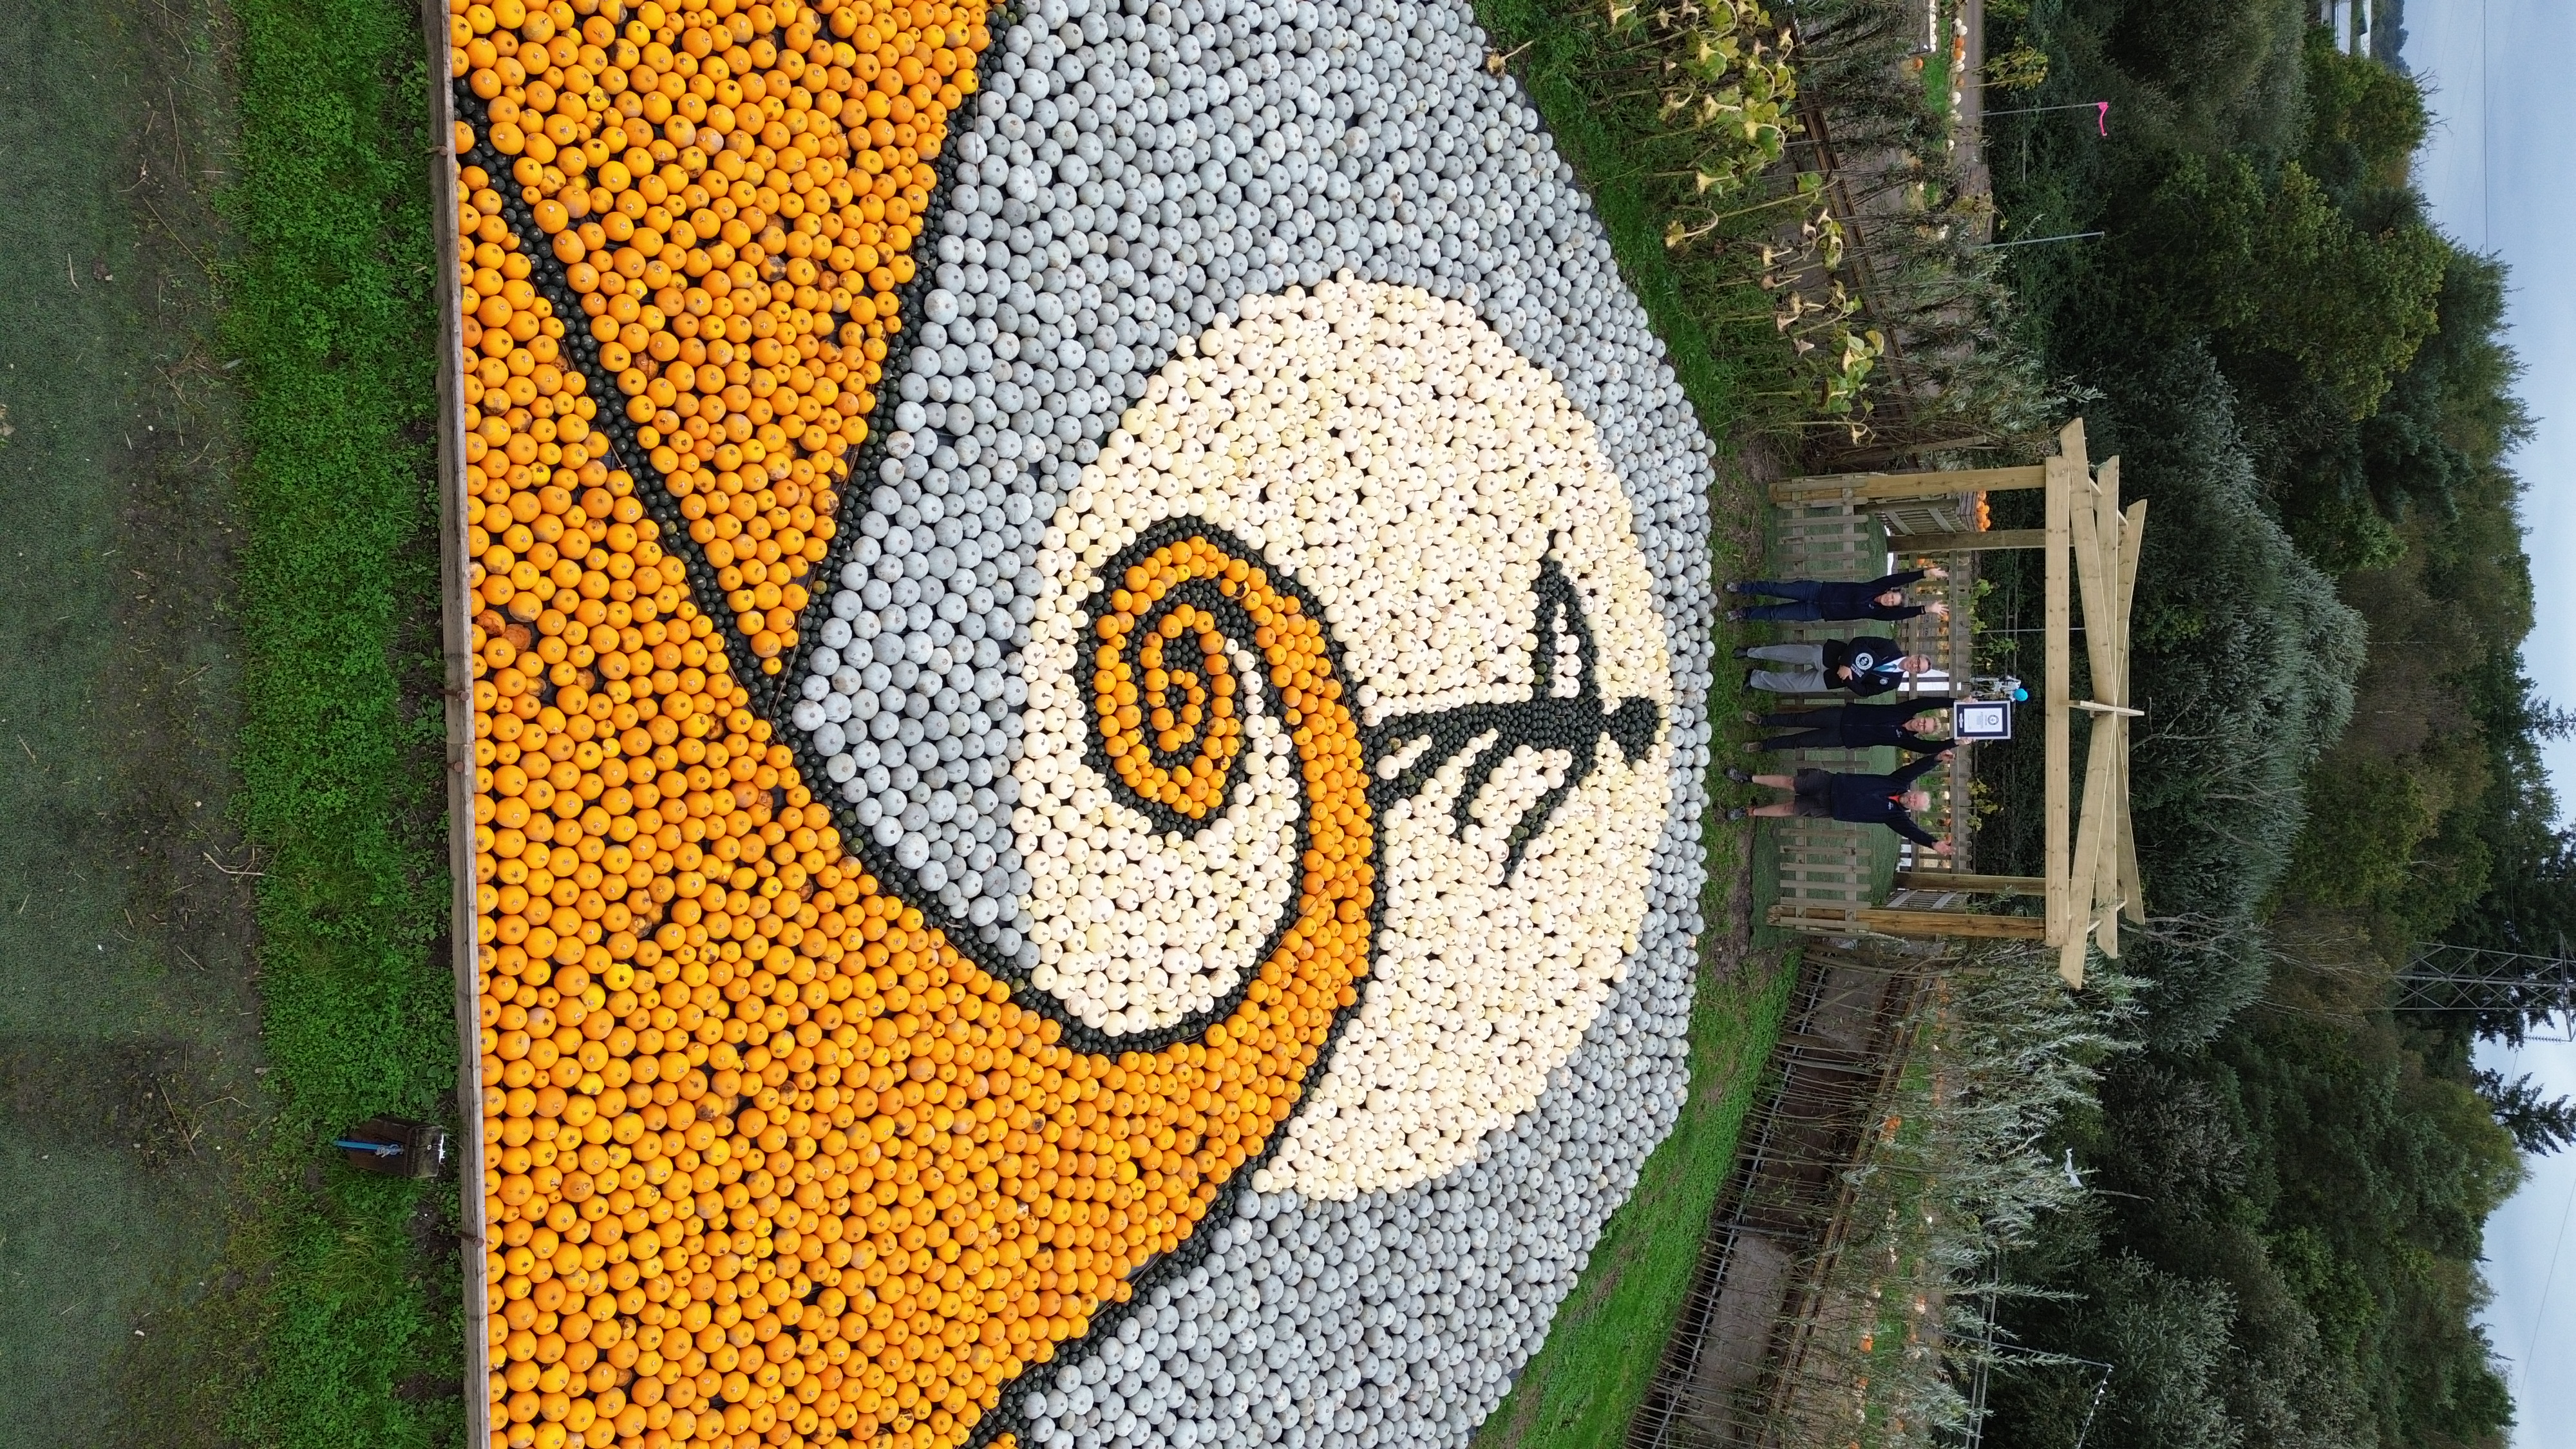 People standing next to mosaic on the ground 